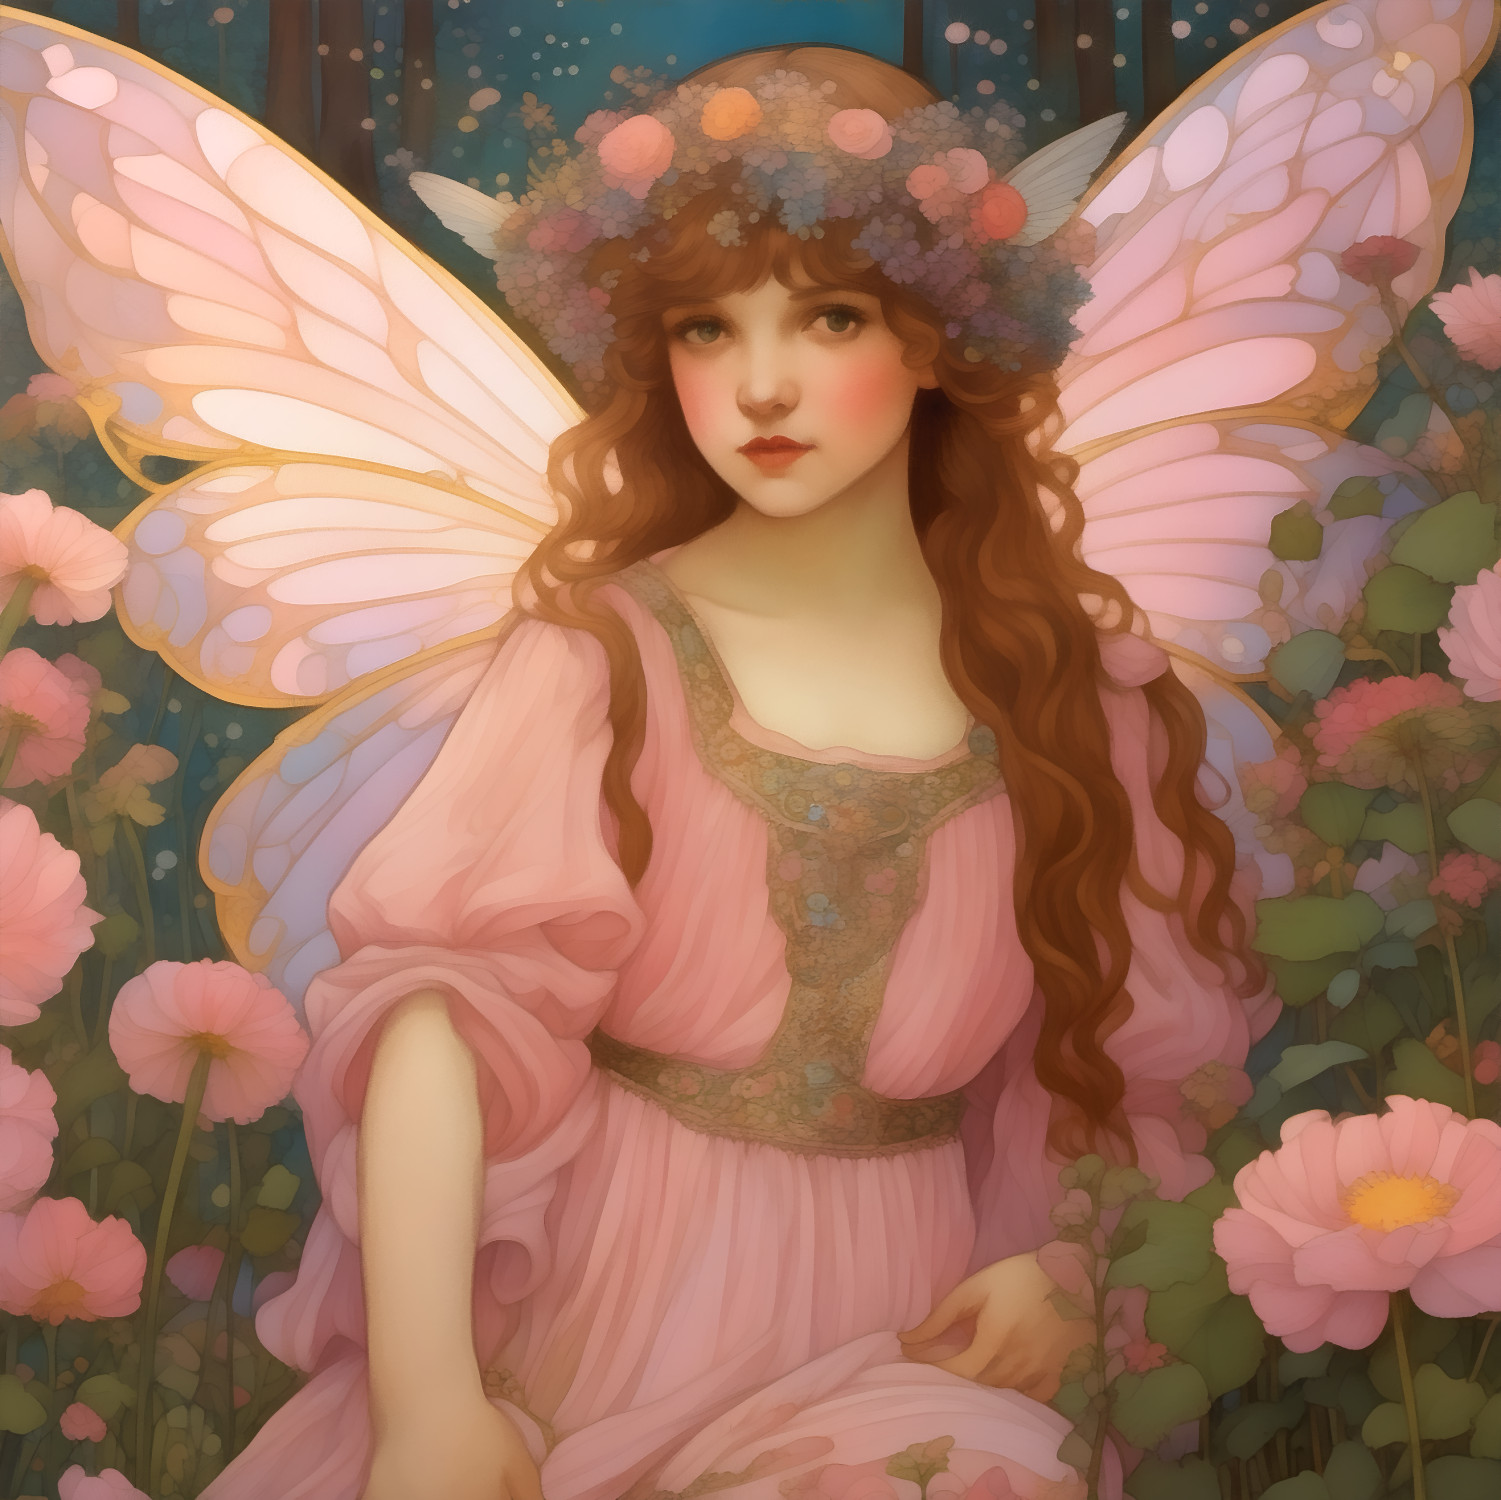 Enchanting Dreams: A Whimsical Pink Fairy Portrait Painting Let your imagination take flight with this enchanting portrait of a whimsical pink fairy 🧚‍♀✨